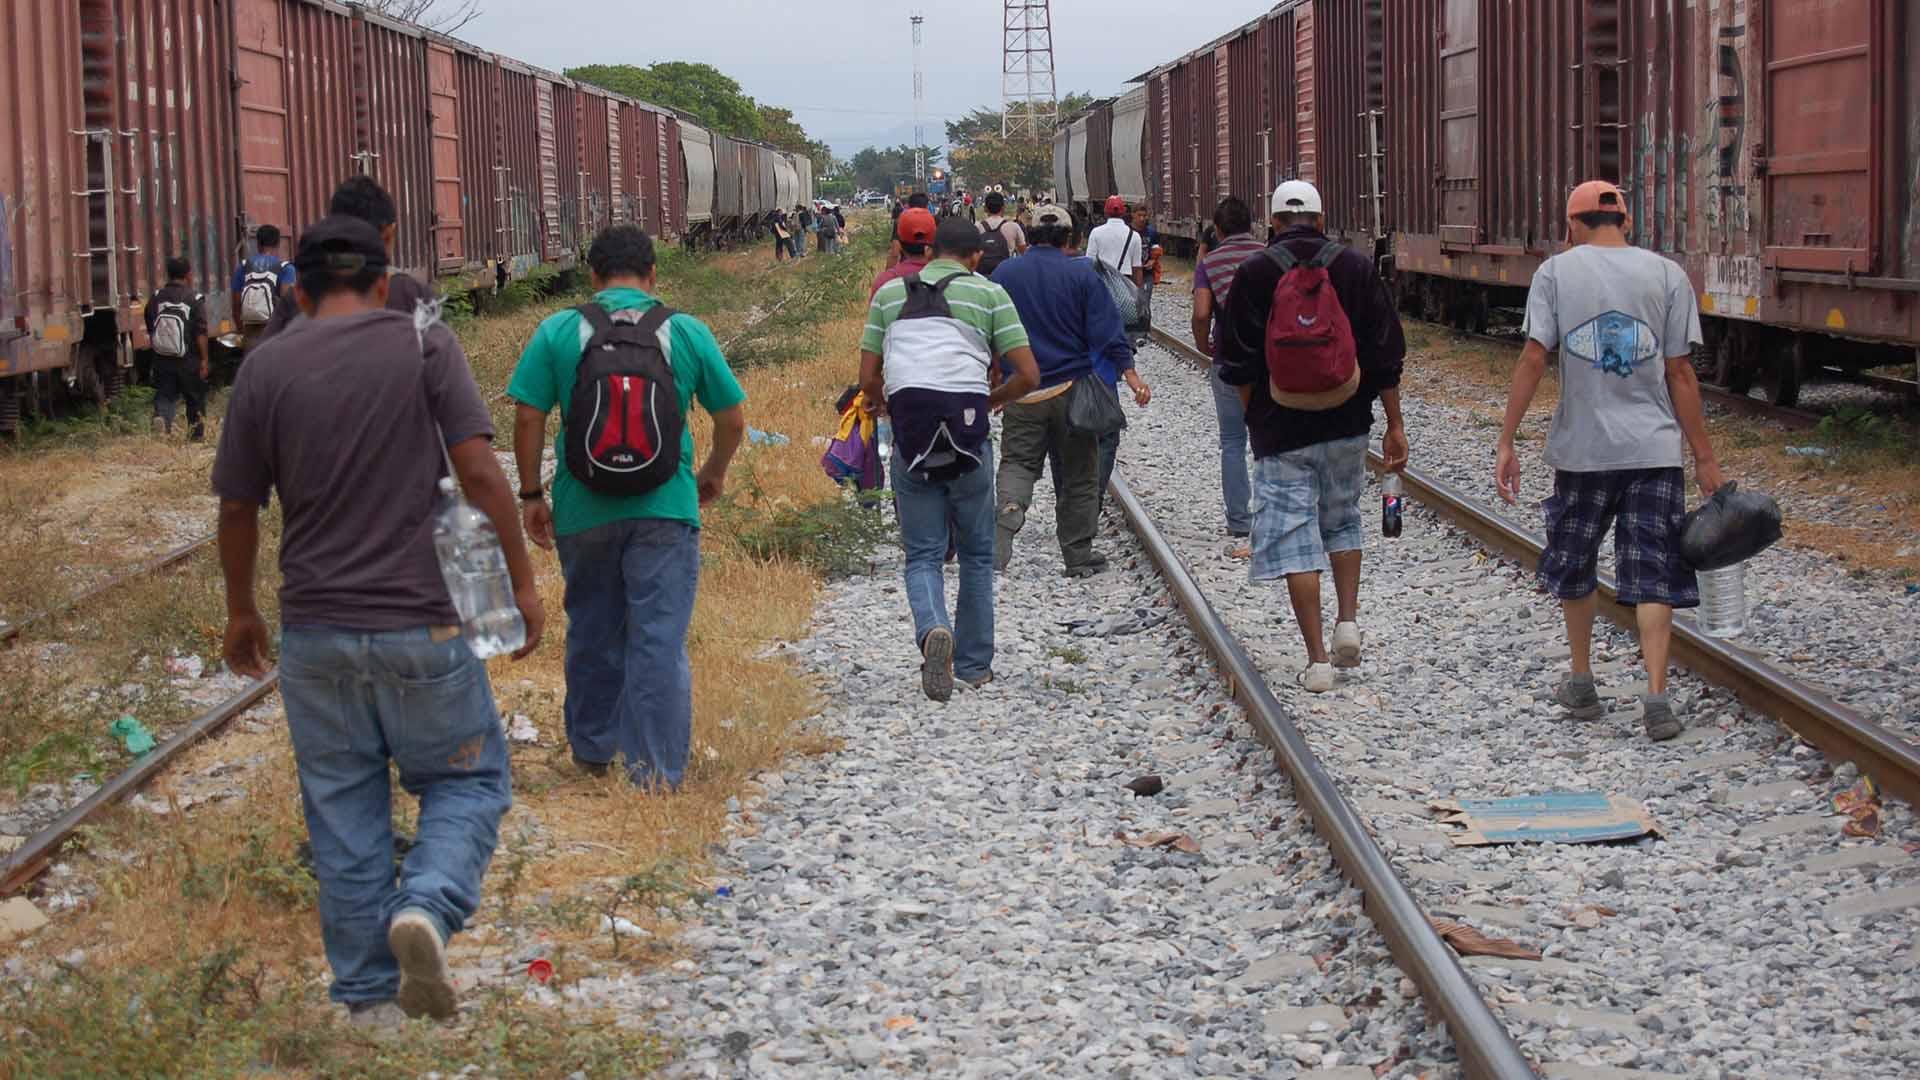 Central American migrants and asylum-seekers prepare to board the freight train they call La Bestia